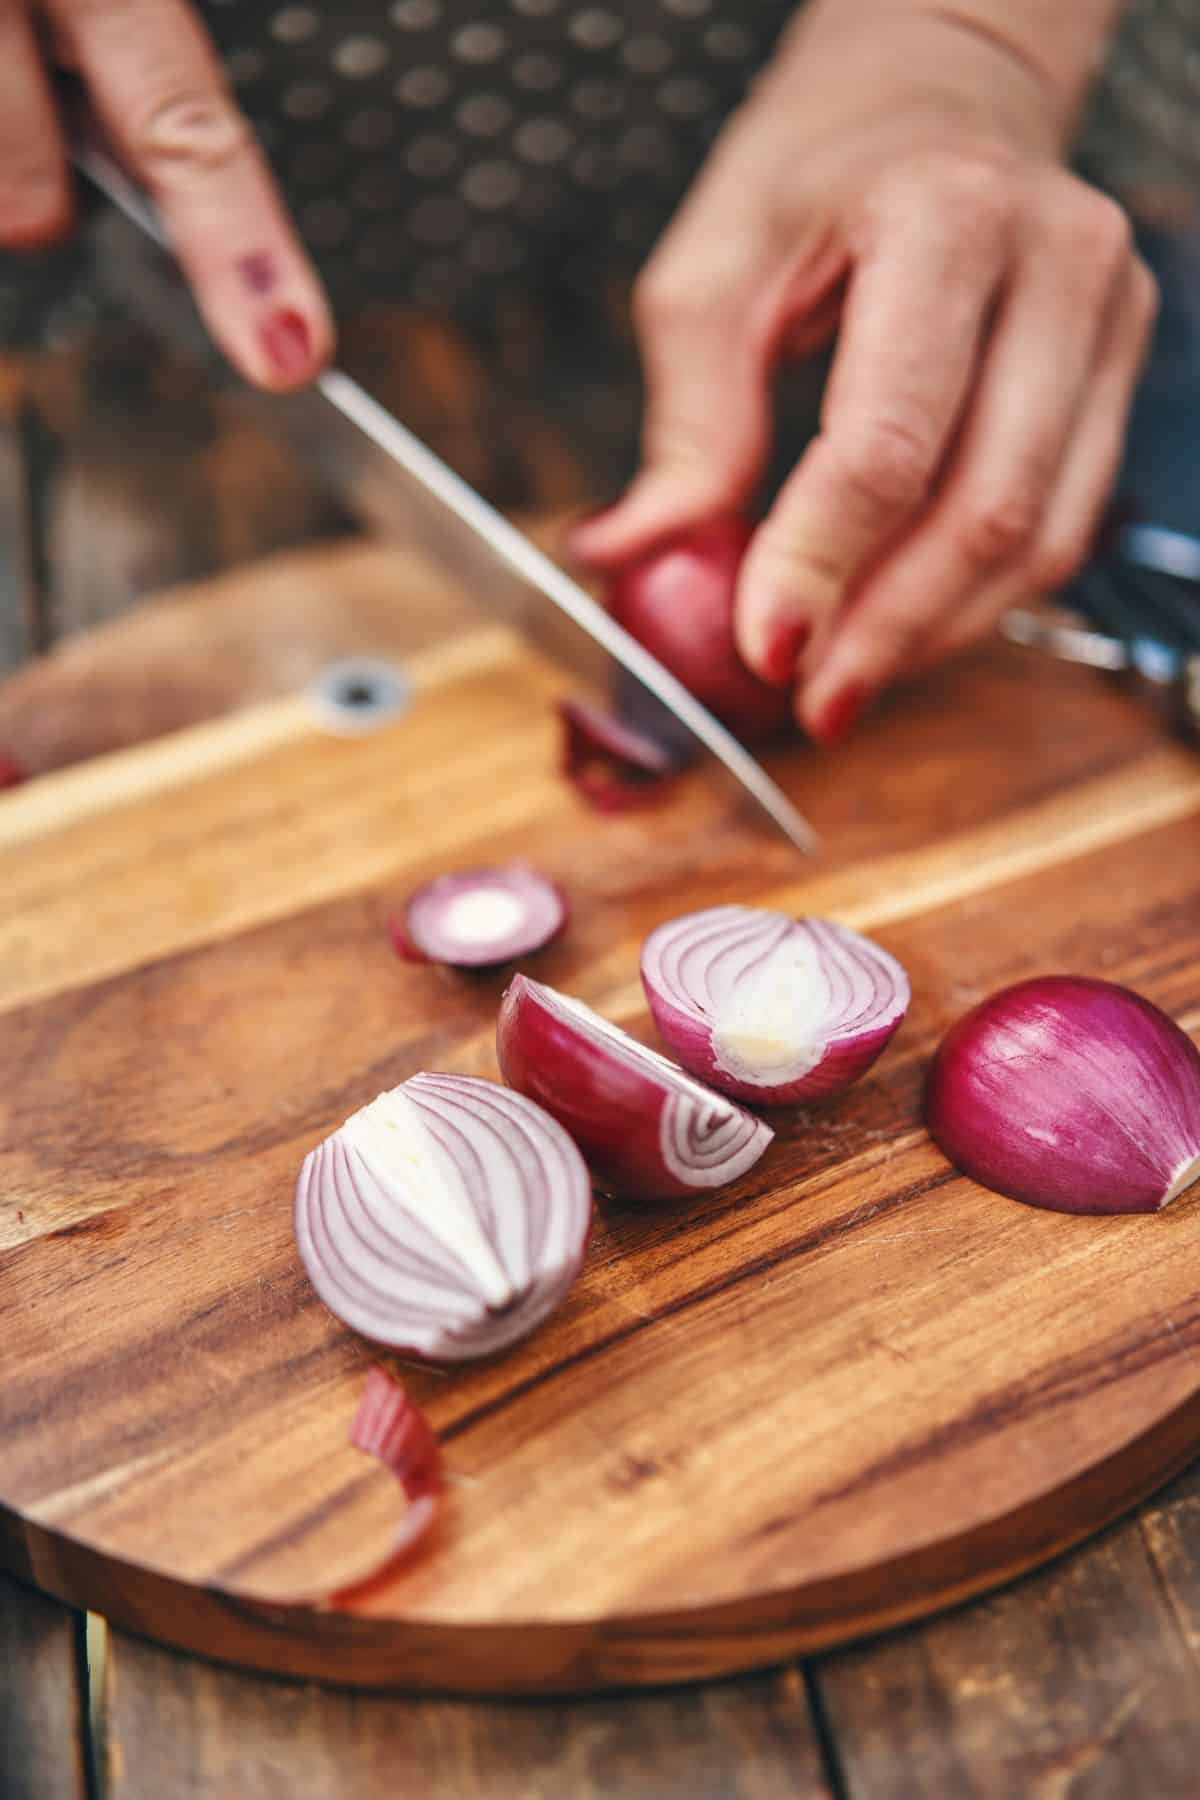 Chopping onions on a wooden cutting board with a knife.